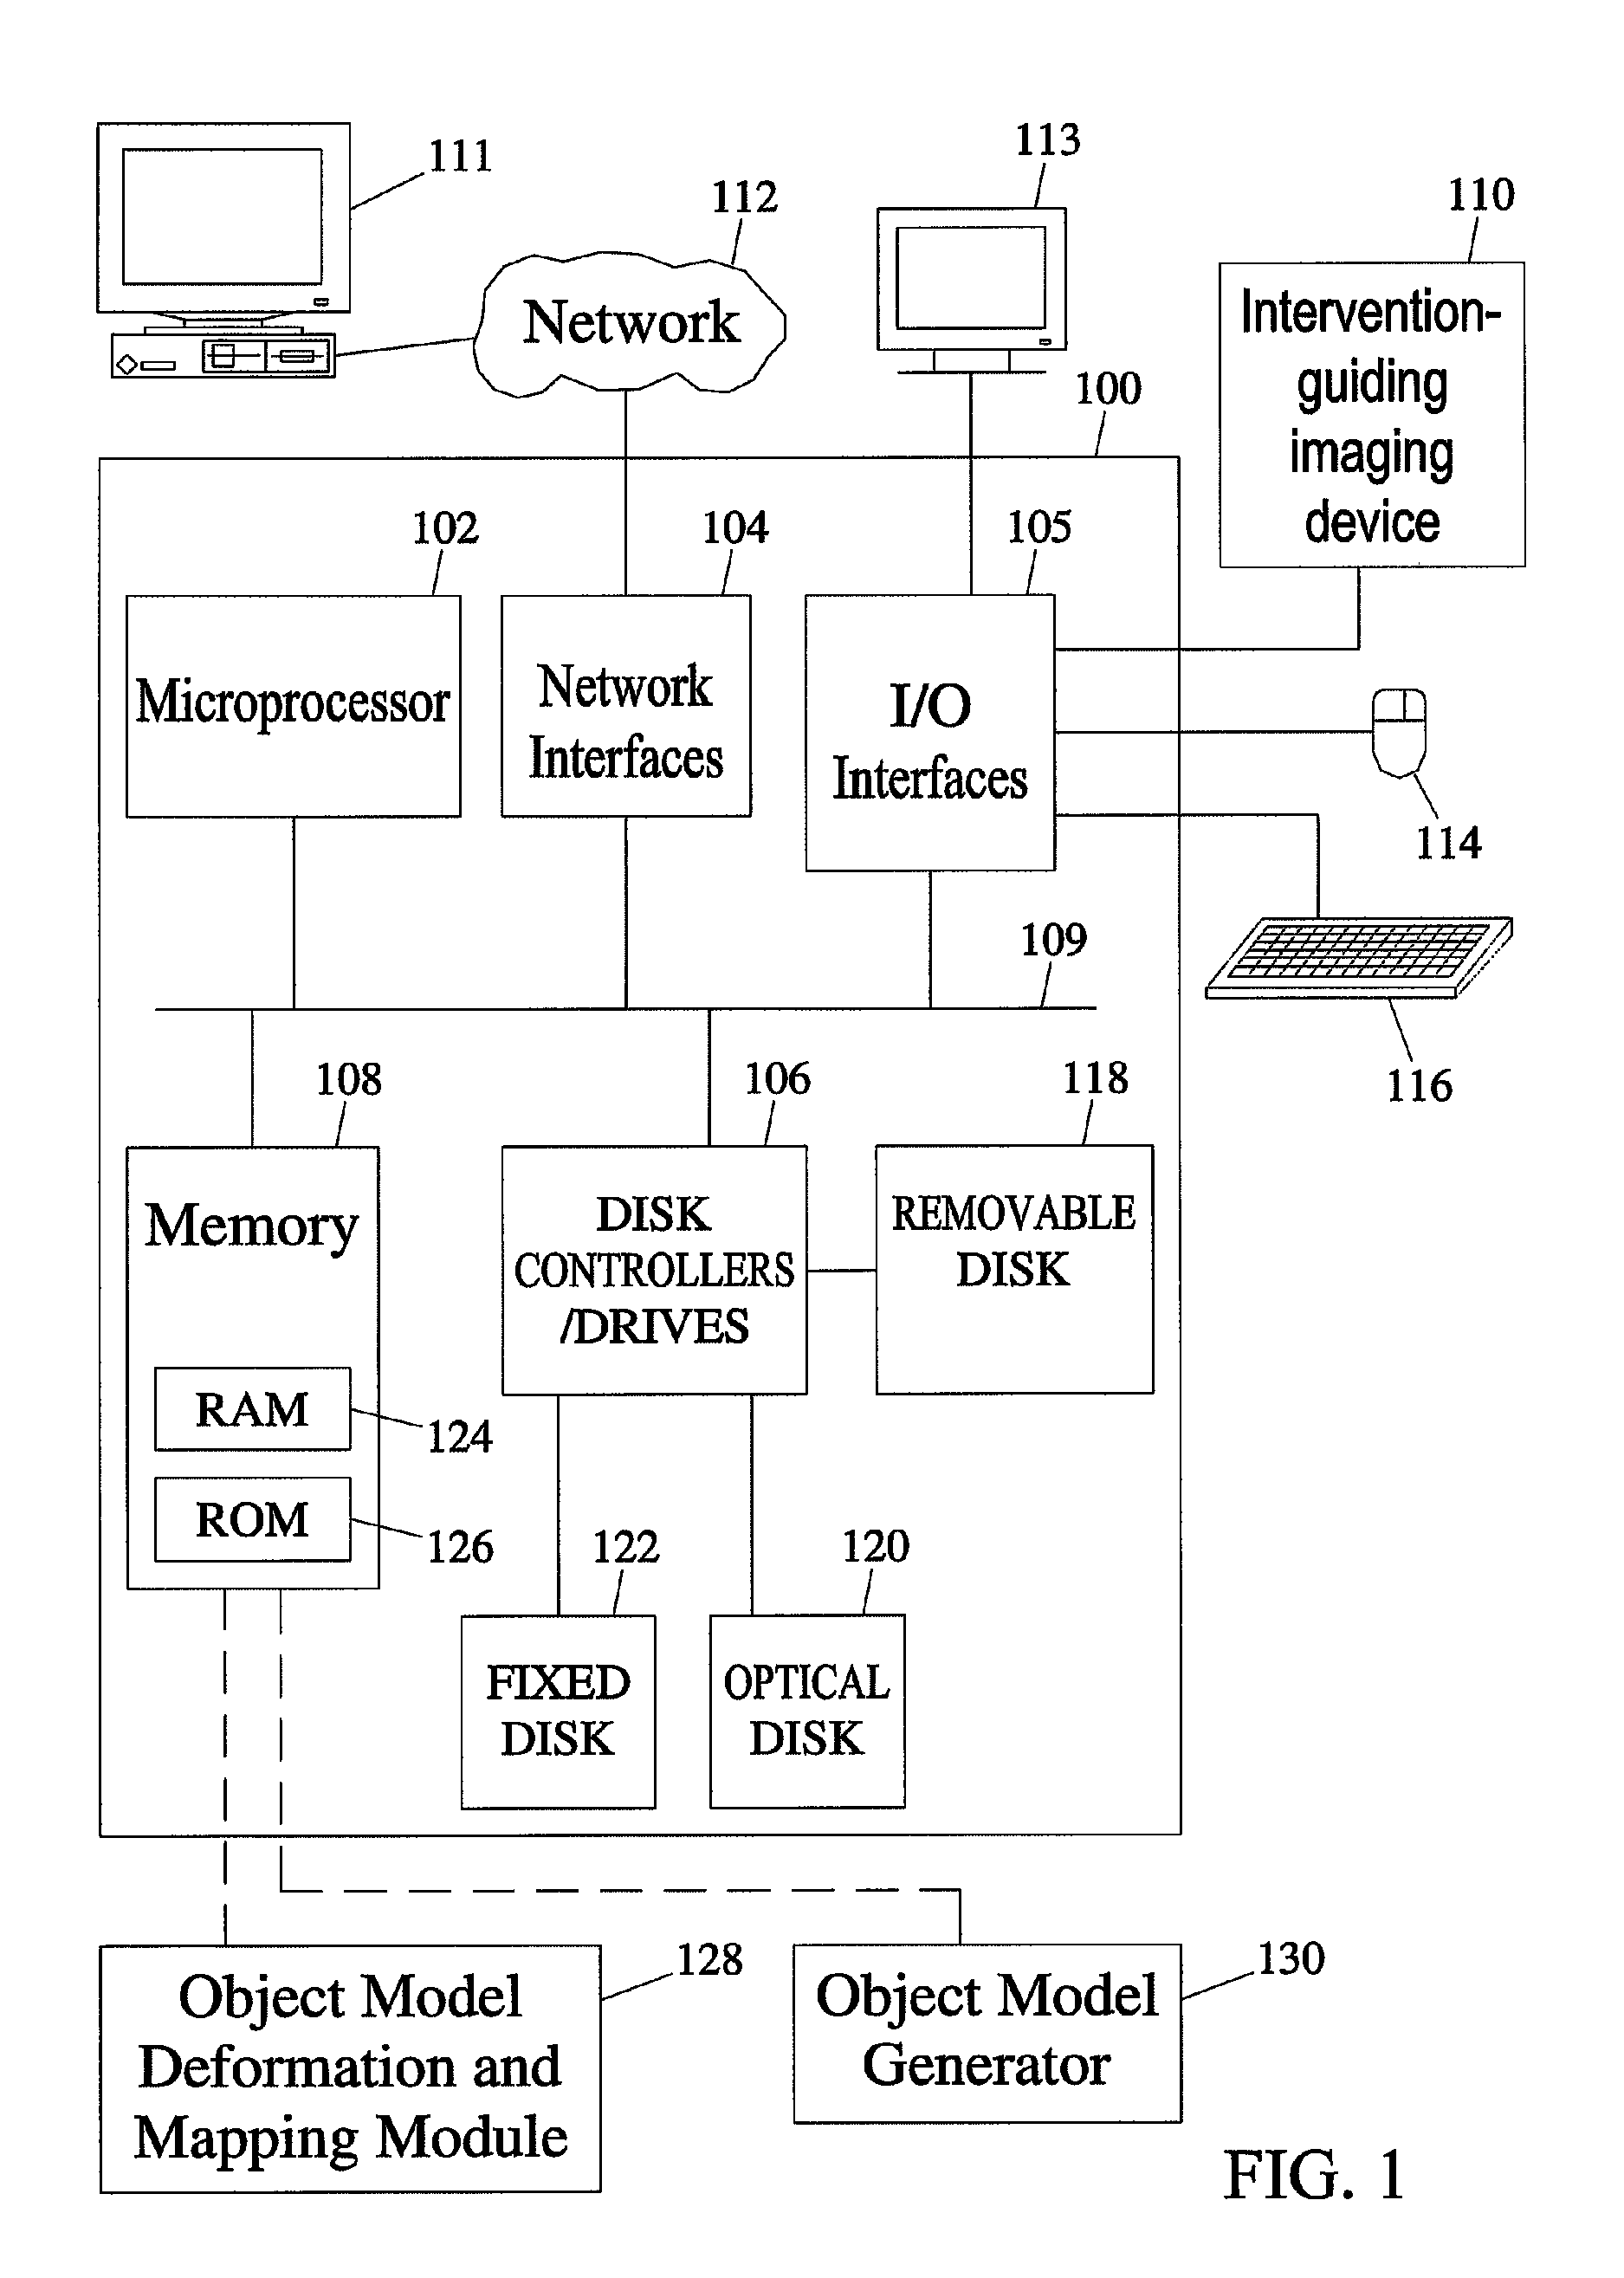 Methods, systems, and computer readable media for mapping regions in a model of an object comprising an anatomical structure from one image data set to images used in a diagnostic or therapeutic intervention